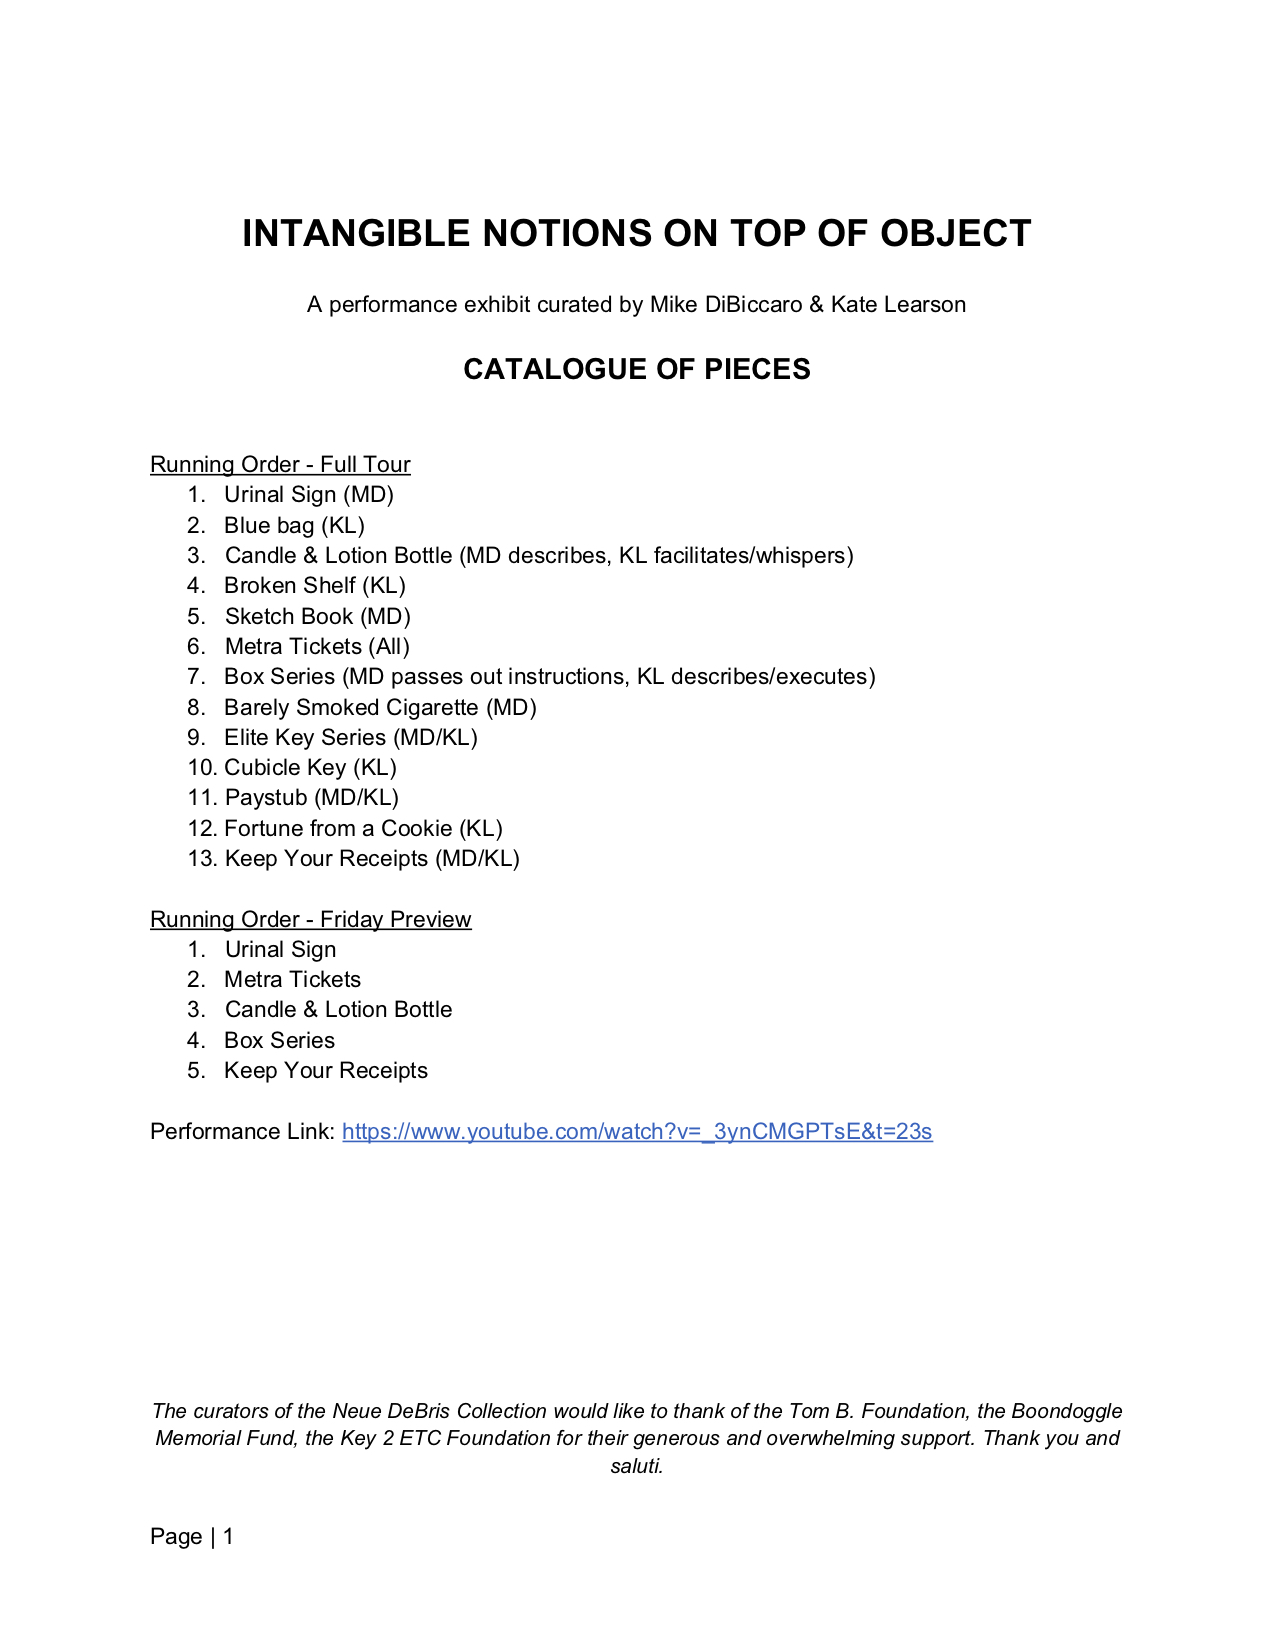 Intangible Notions Catalogue and Script1.jpg